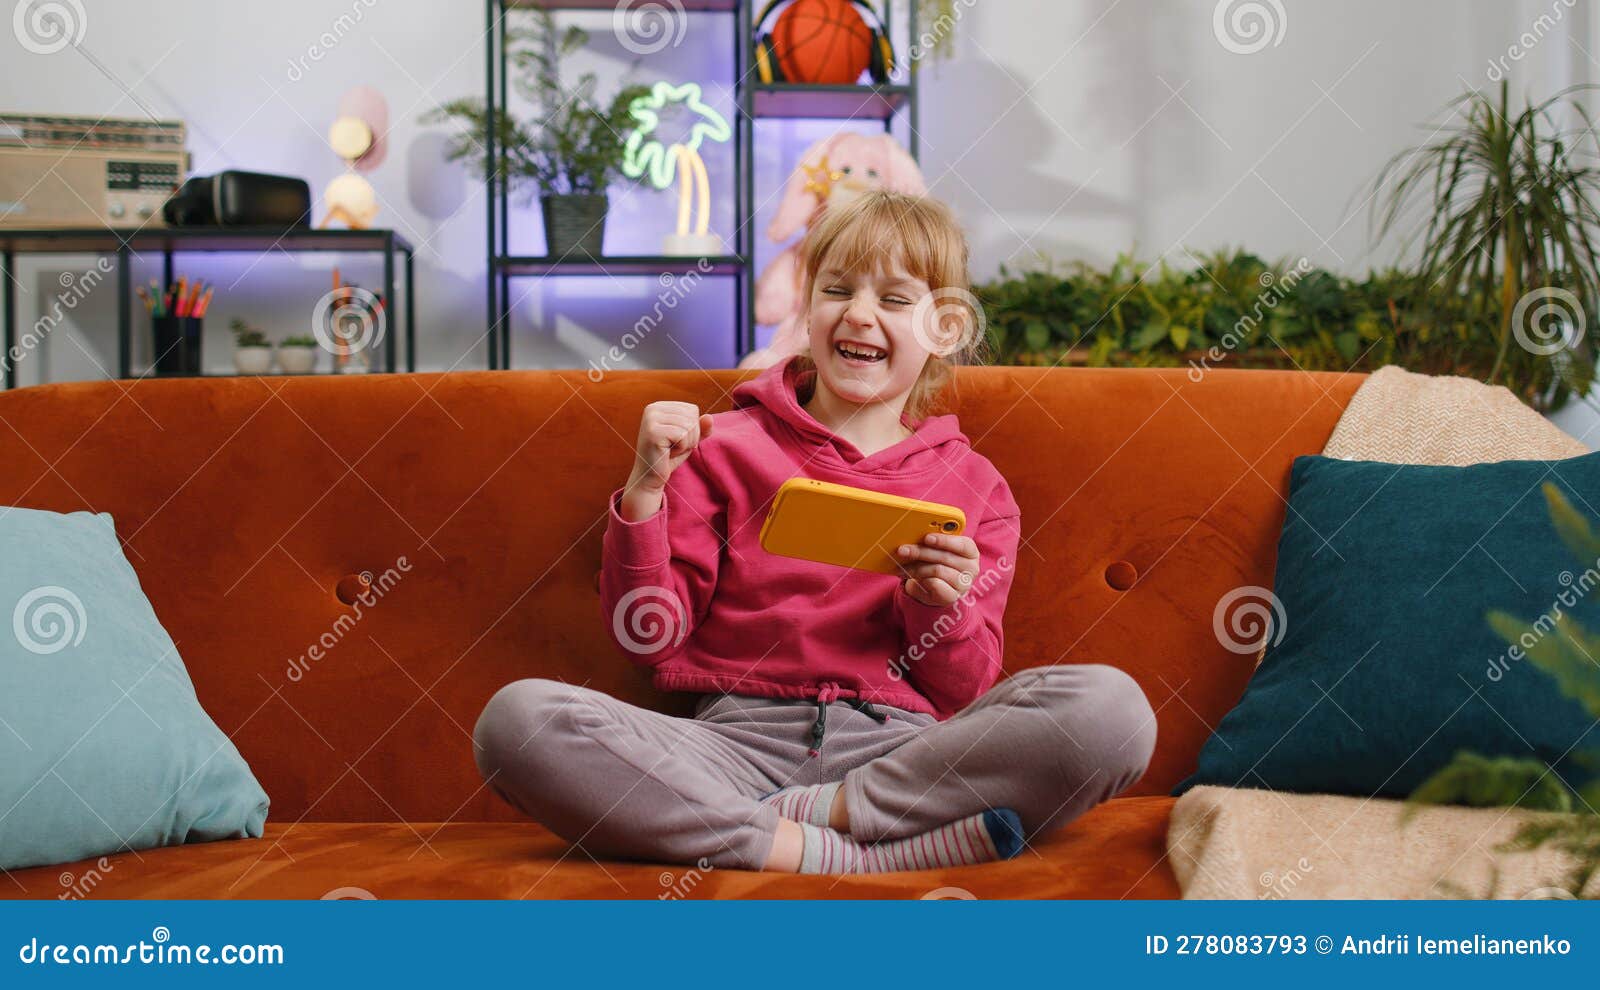 Worried Funny Child Kid Girl Playing Online Racing Simulator or Shooter Video Games on Smartphone Stock Image